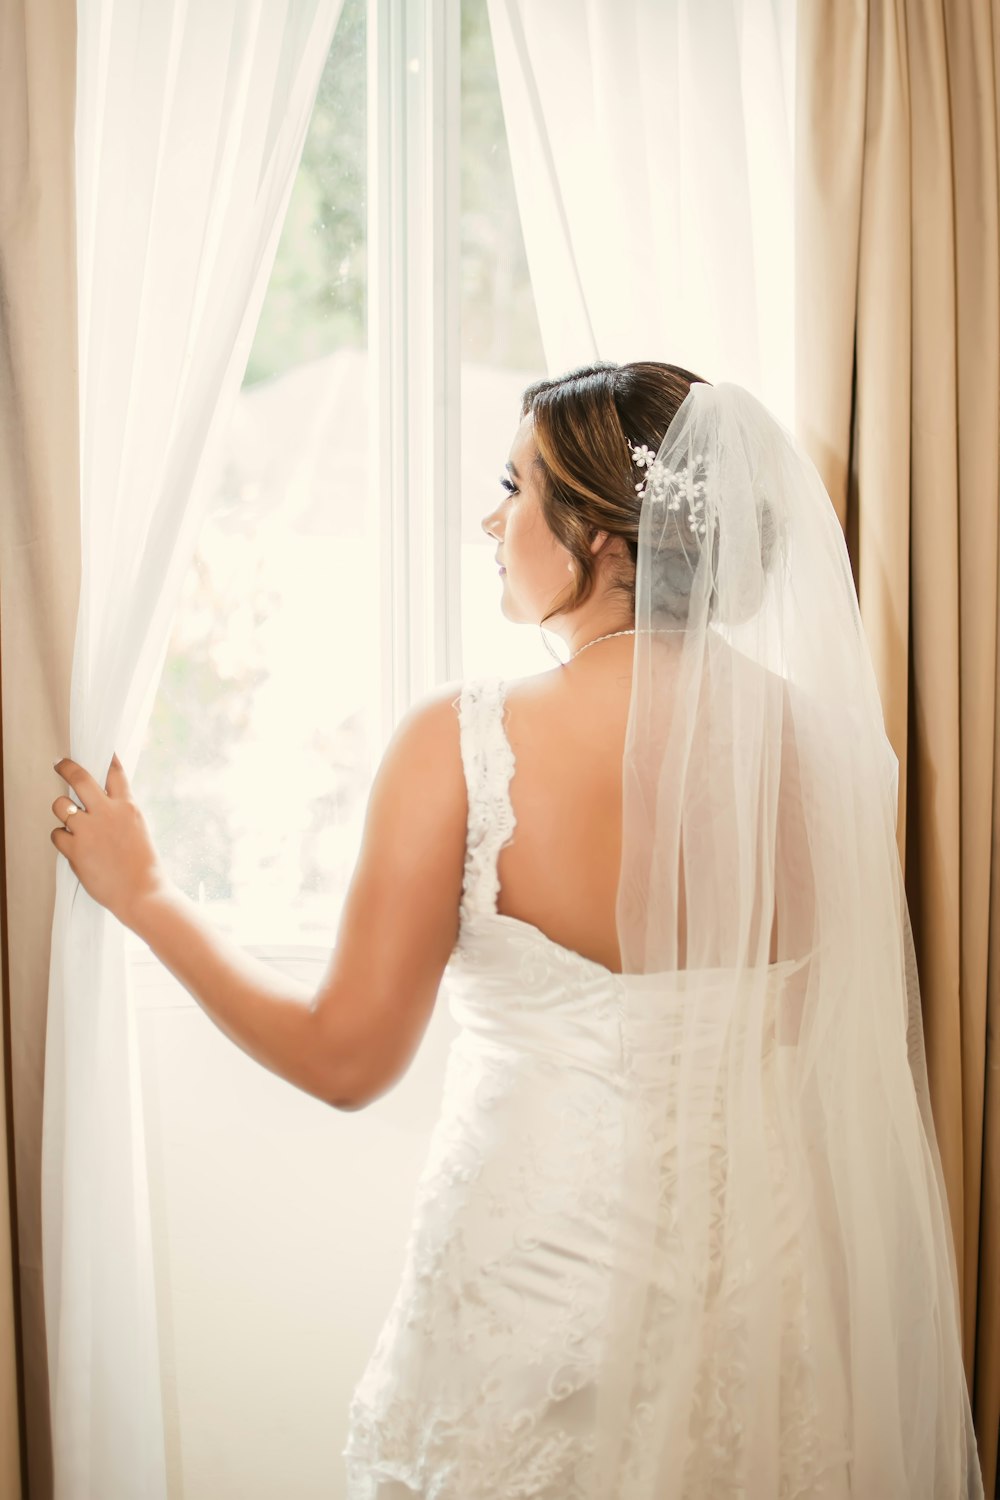 a woman in a wedding dress looking out a window